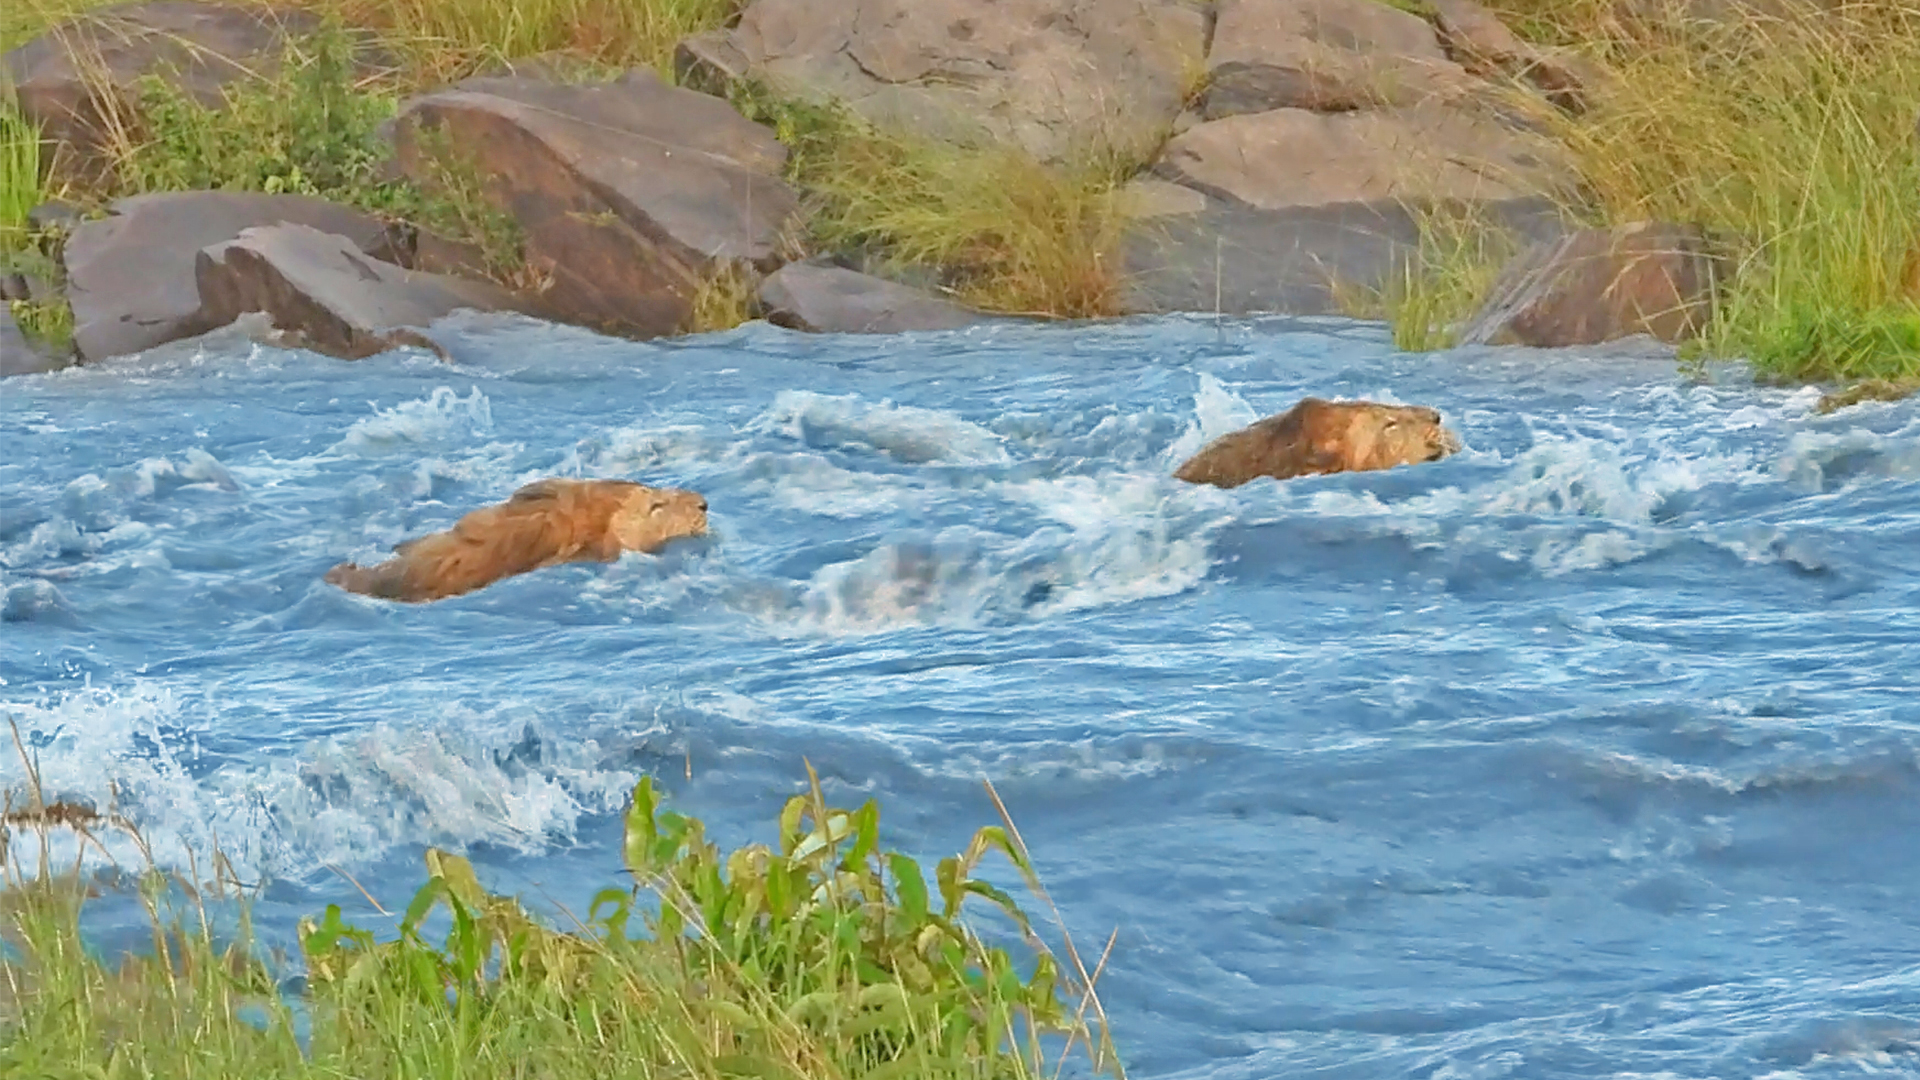 Male Lions Tackle Raging River